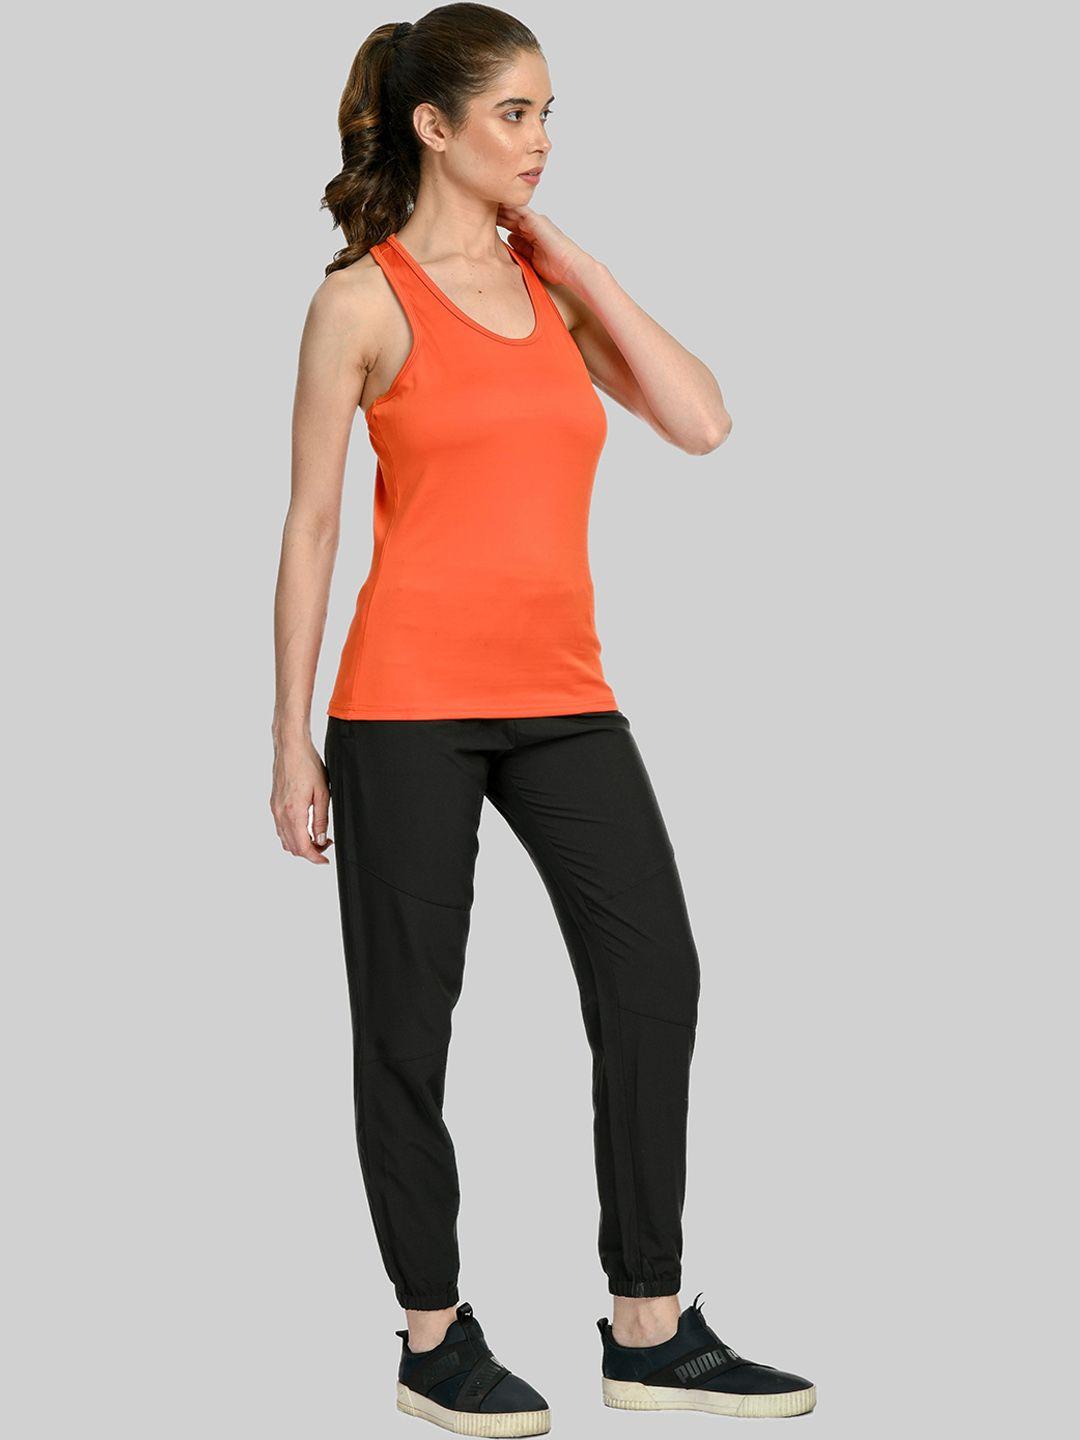 body smith racerback tank top with joggers co-ords